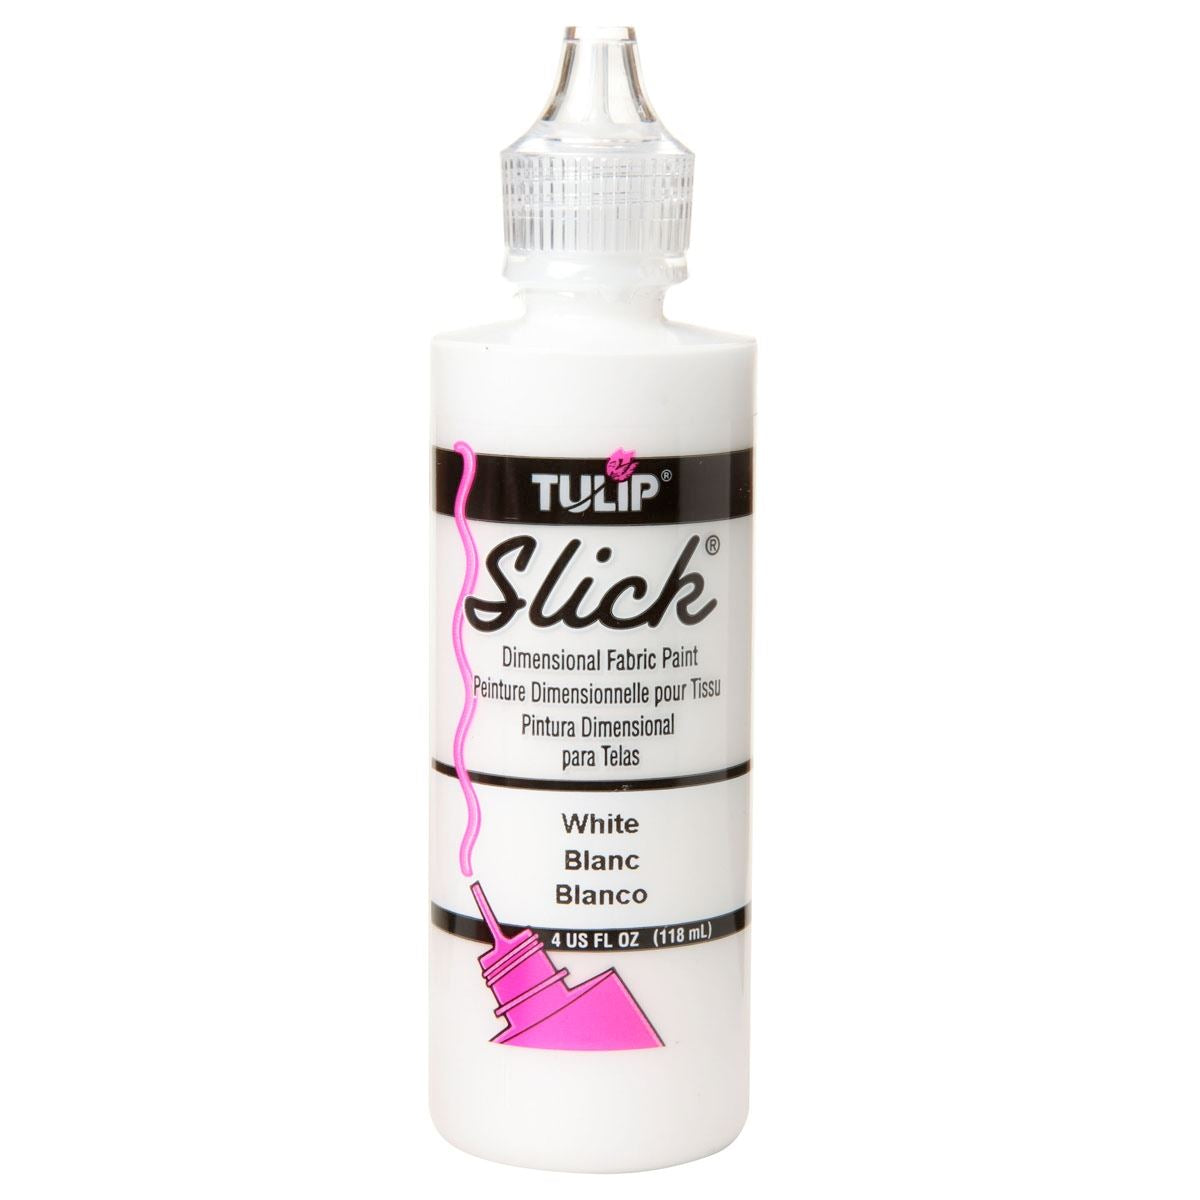 Lot of 3 Tulip Slick White Dimensional Fabric Paint 4oz containers 371832